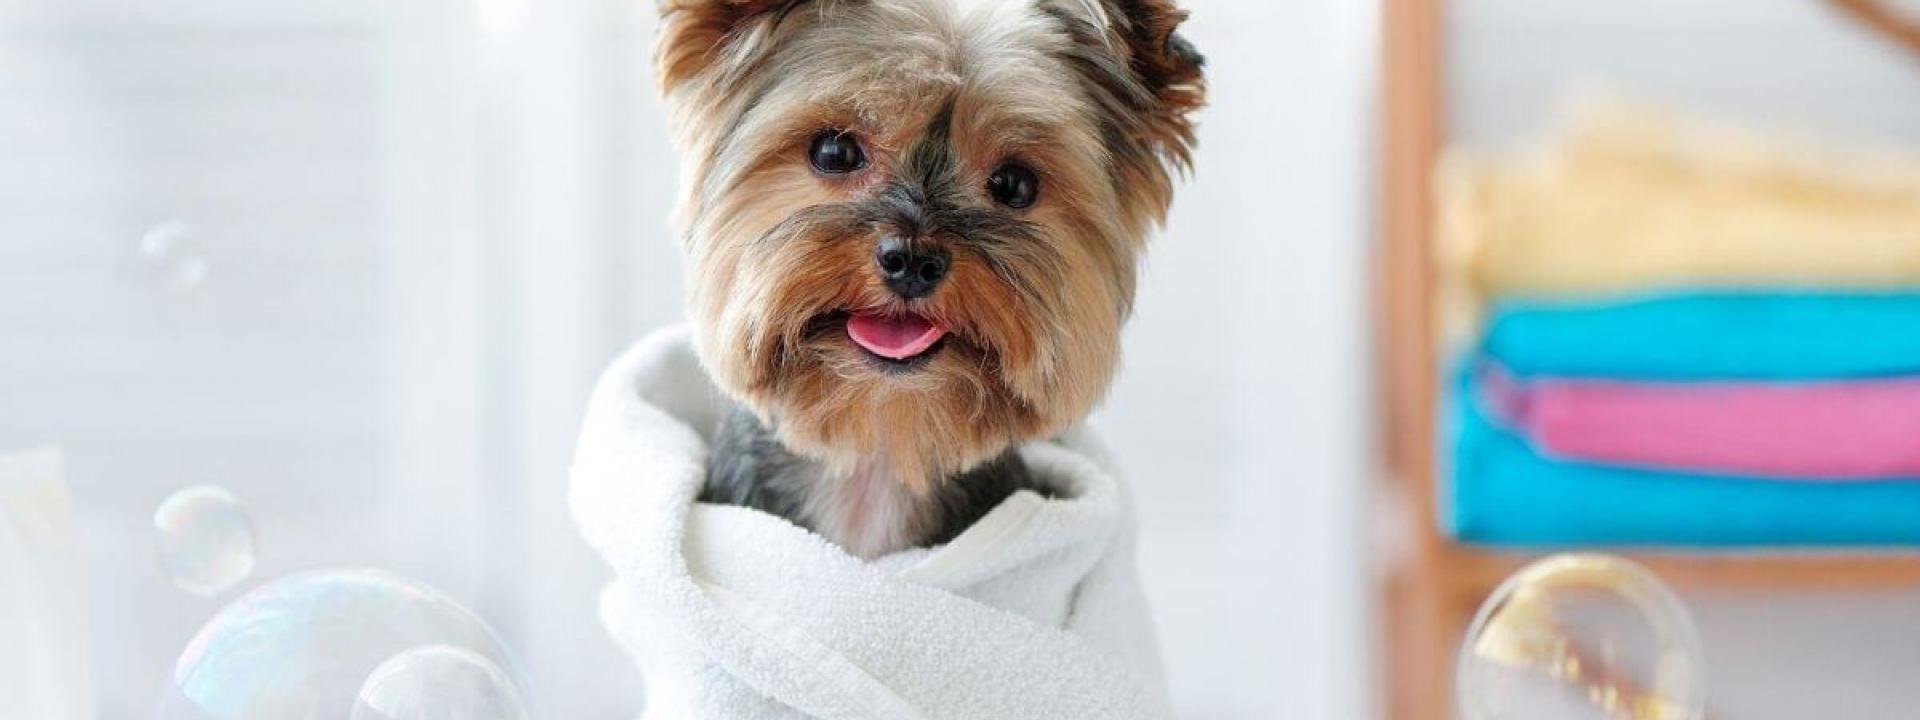 dog bathing and grooming tips